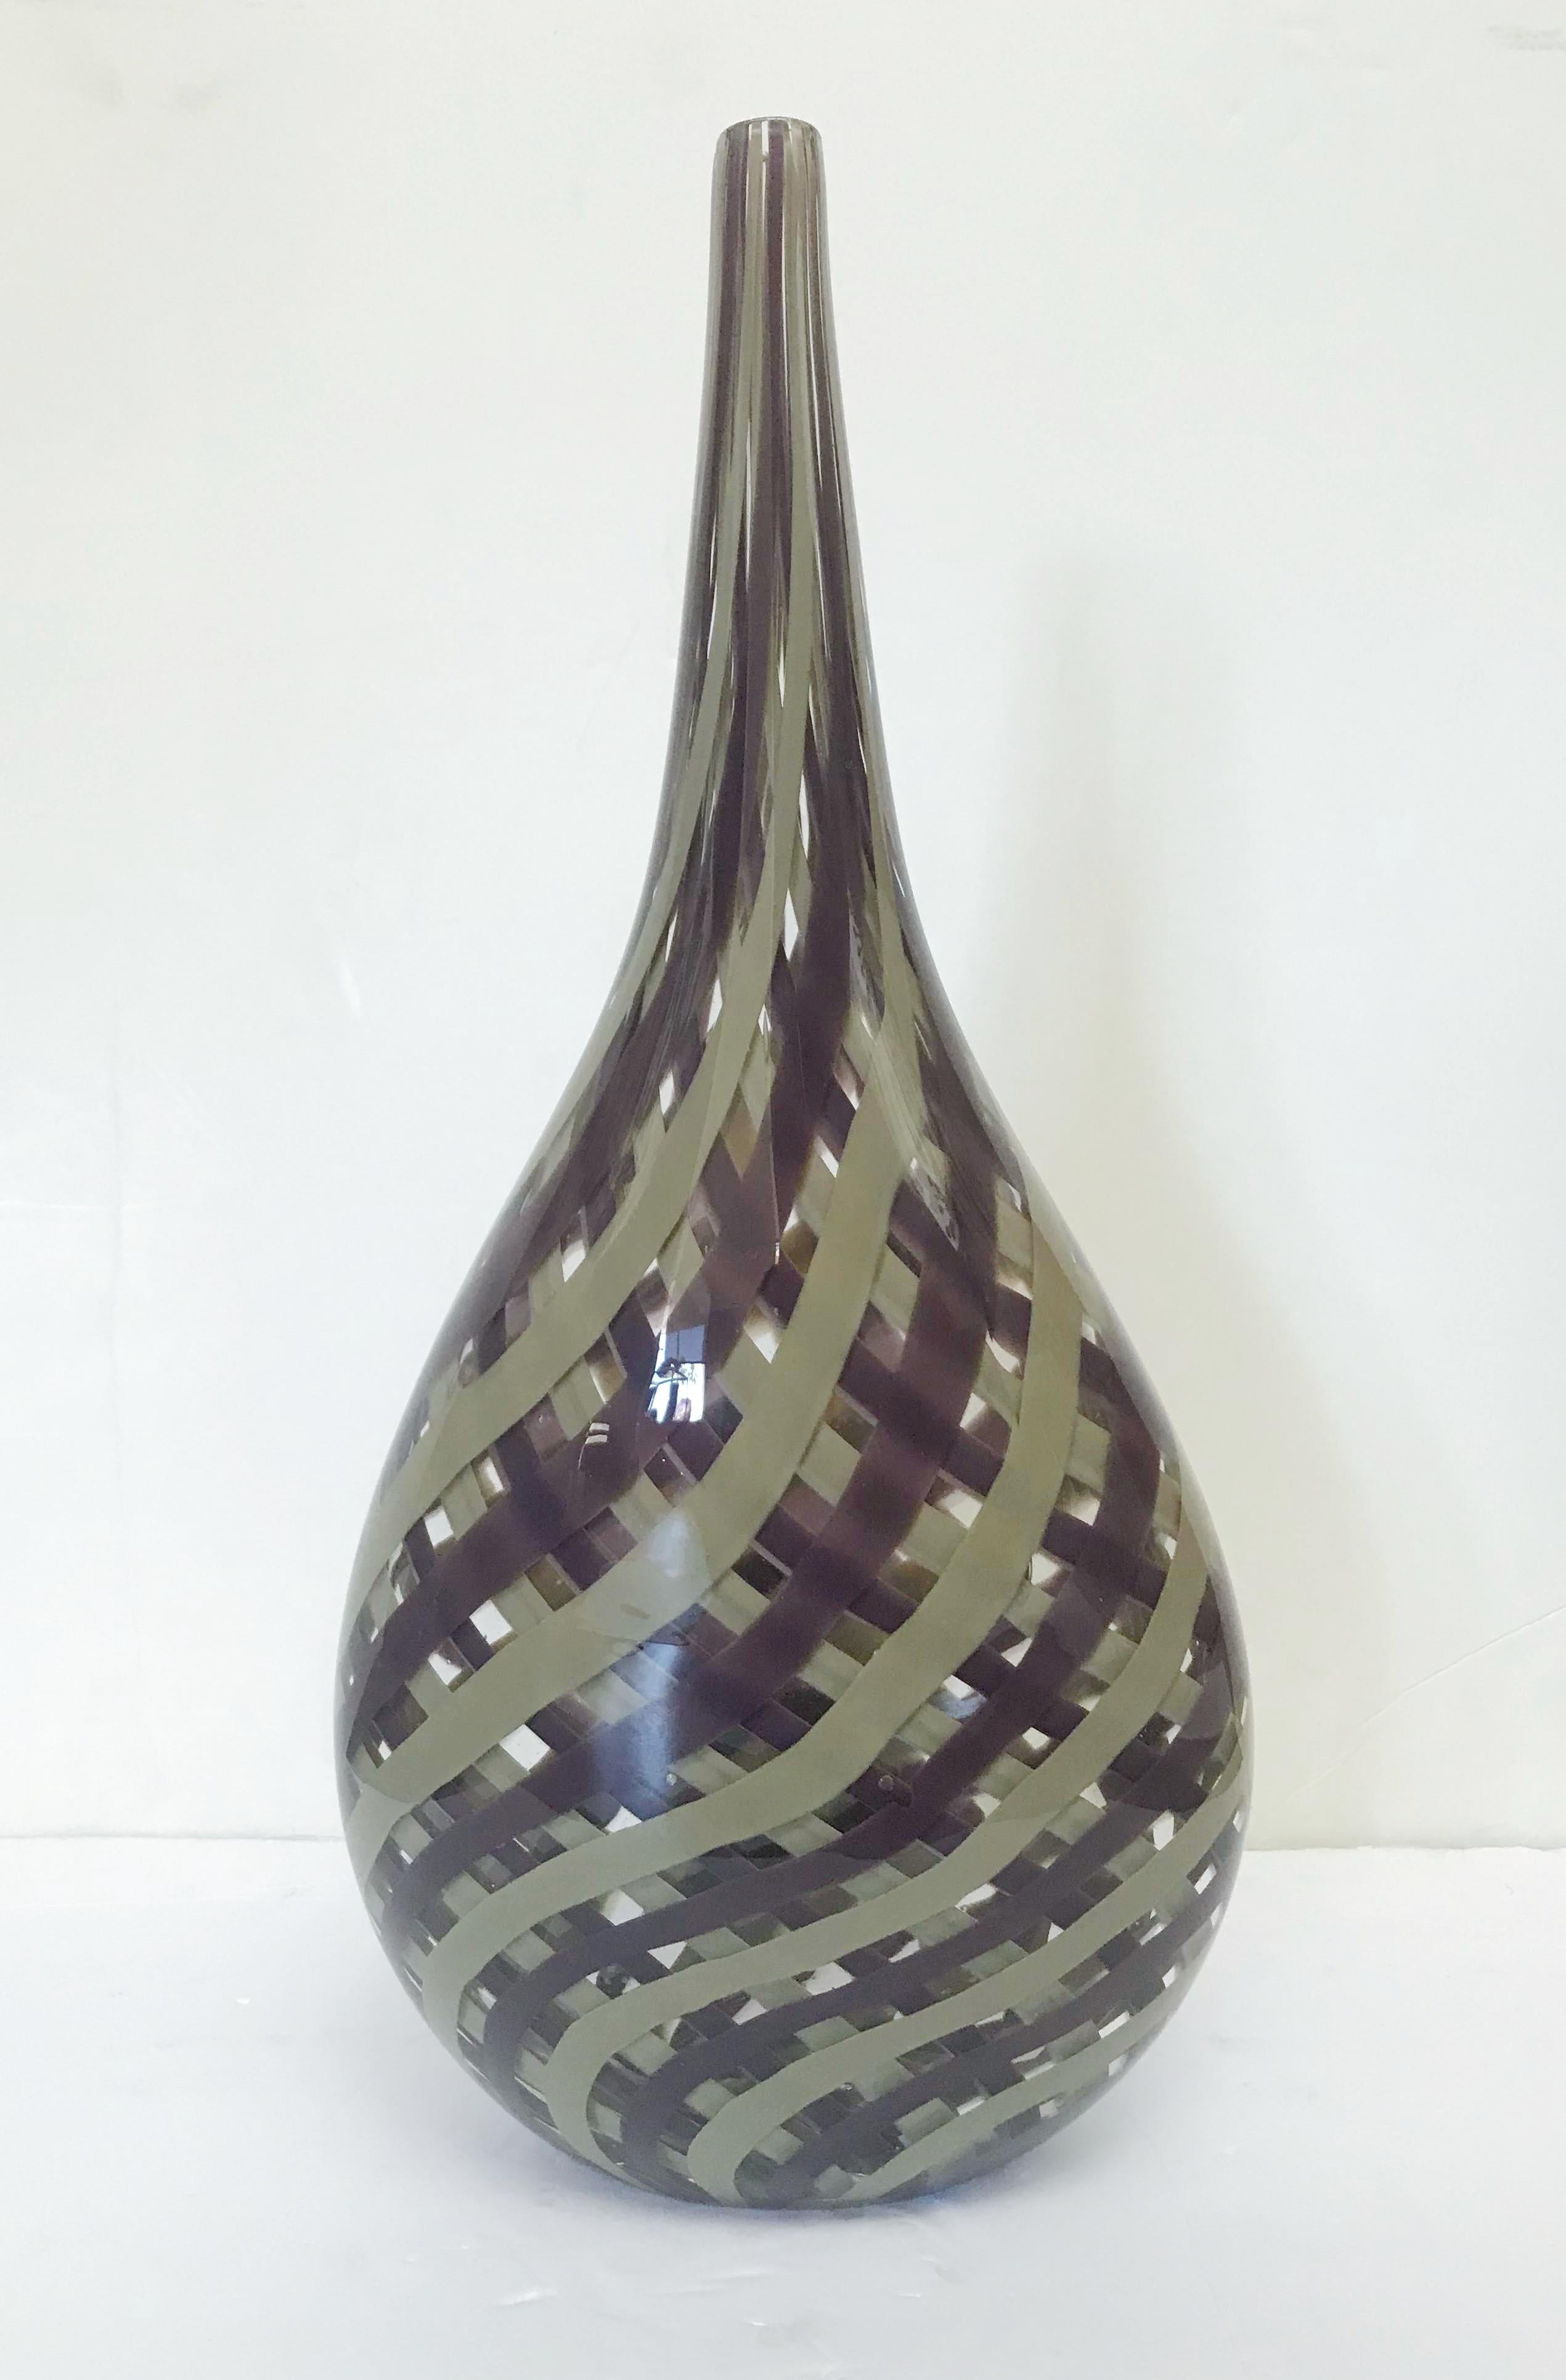 Italian Murano glass vase hand blown with purple and mustard stripes interlacing one other / Made in Italy, circa 1970s
Murano mark engraved on the base
Measures: Height 20 inches, width 9 inches, depth 5 inches
1 in stock in Palm Springs currently